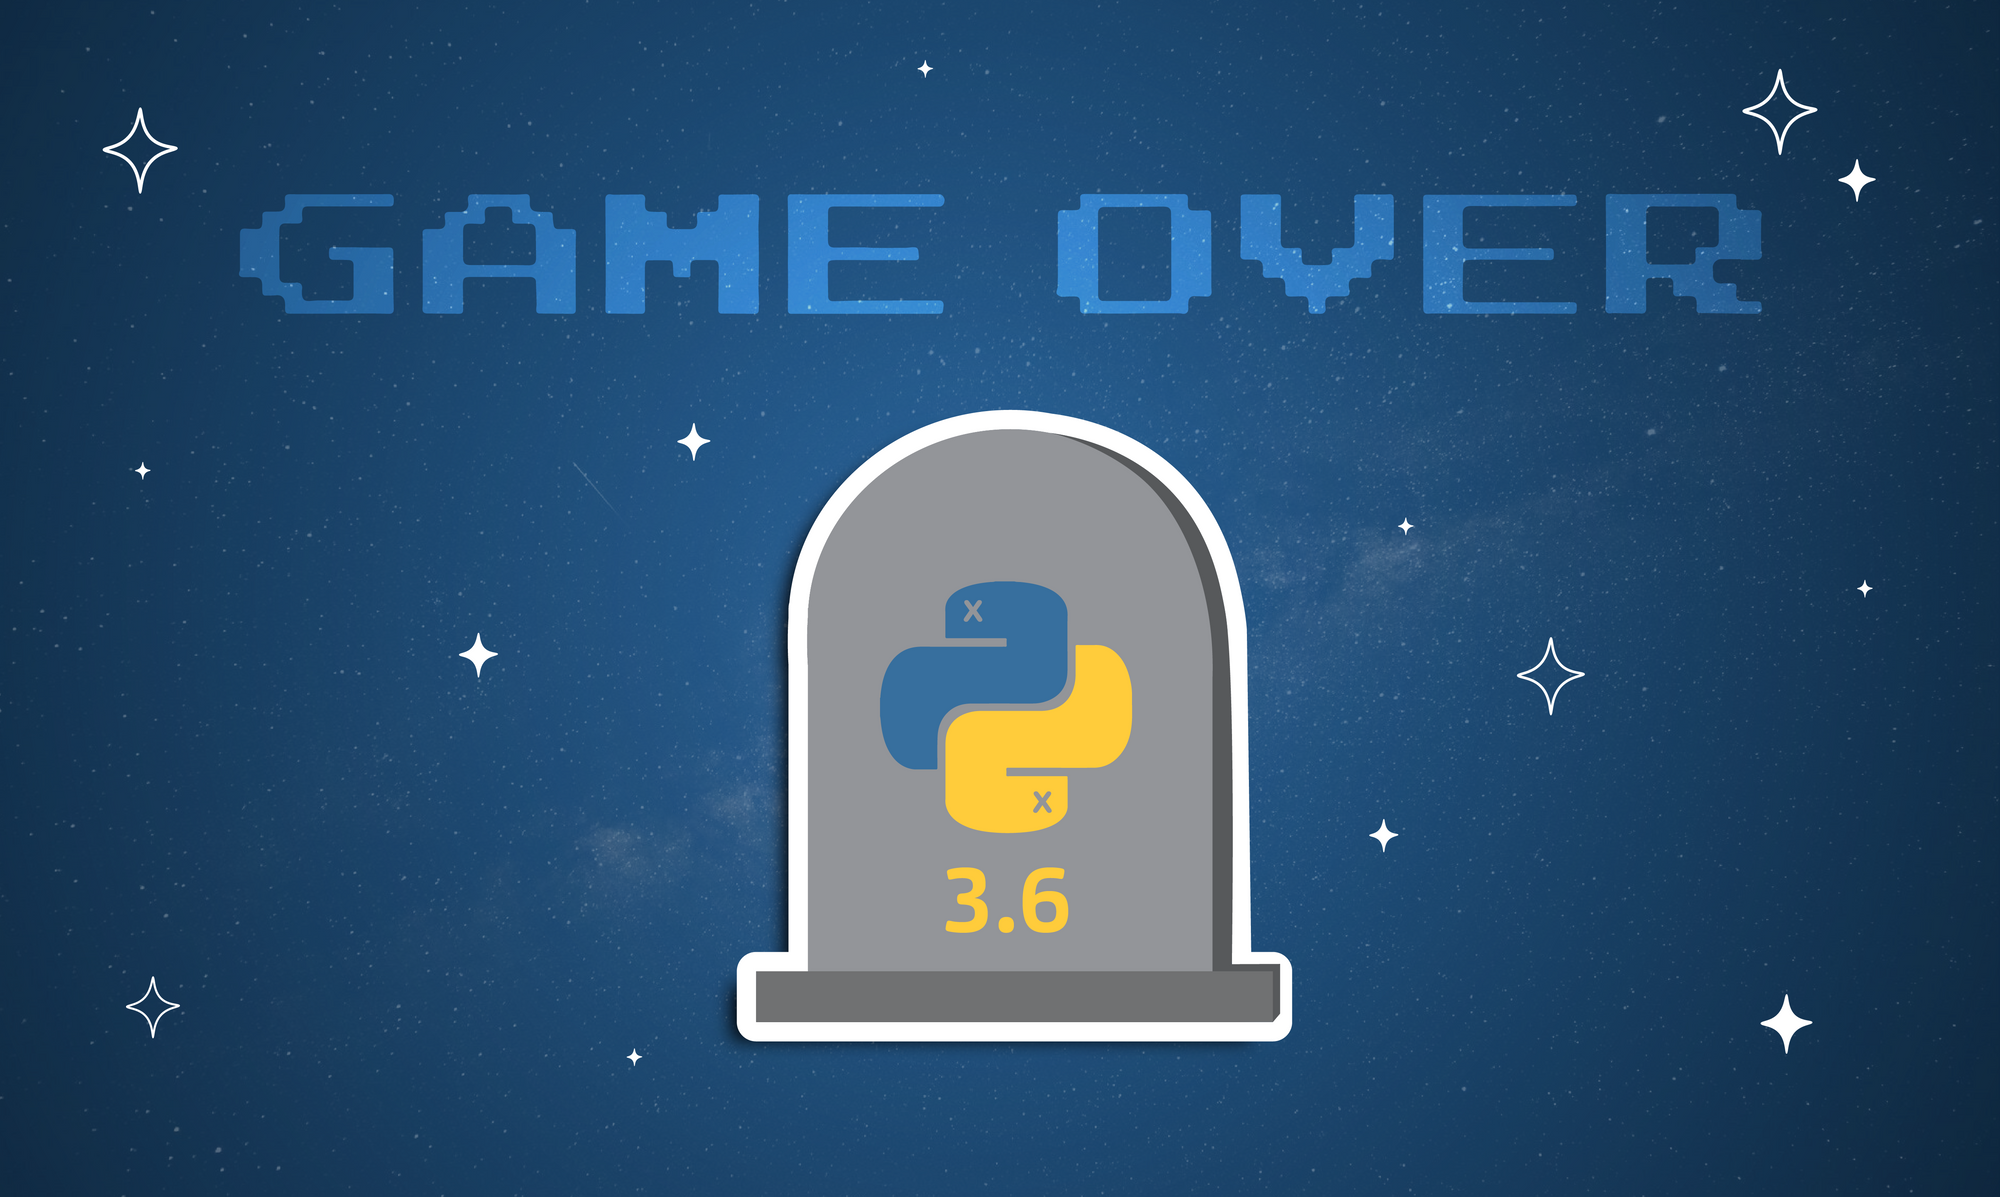 Deprecation Notice: Python 3.6 Has Reached Its End of Life